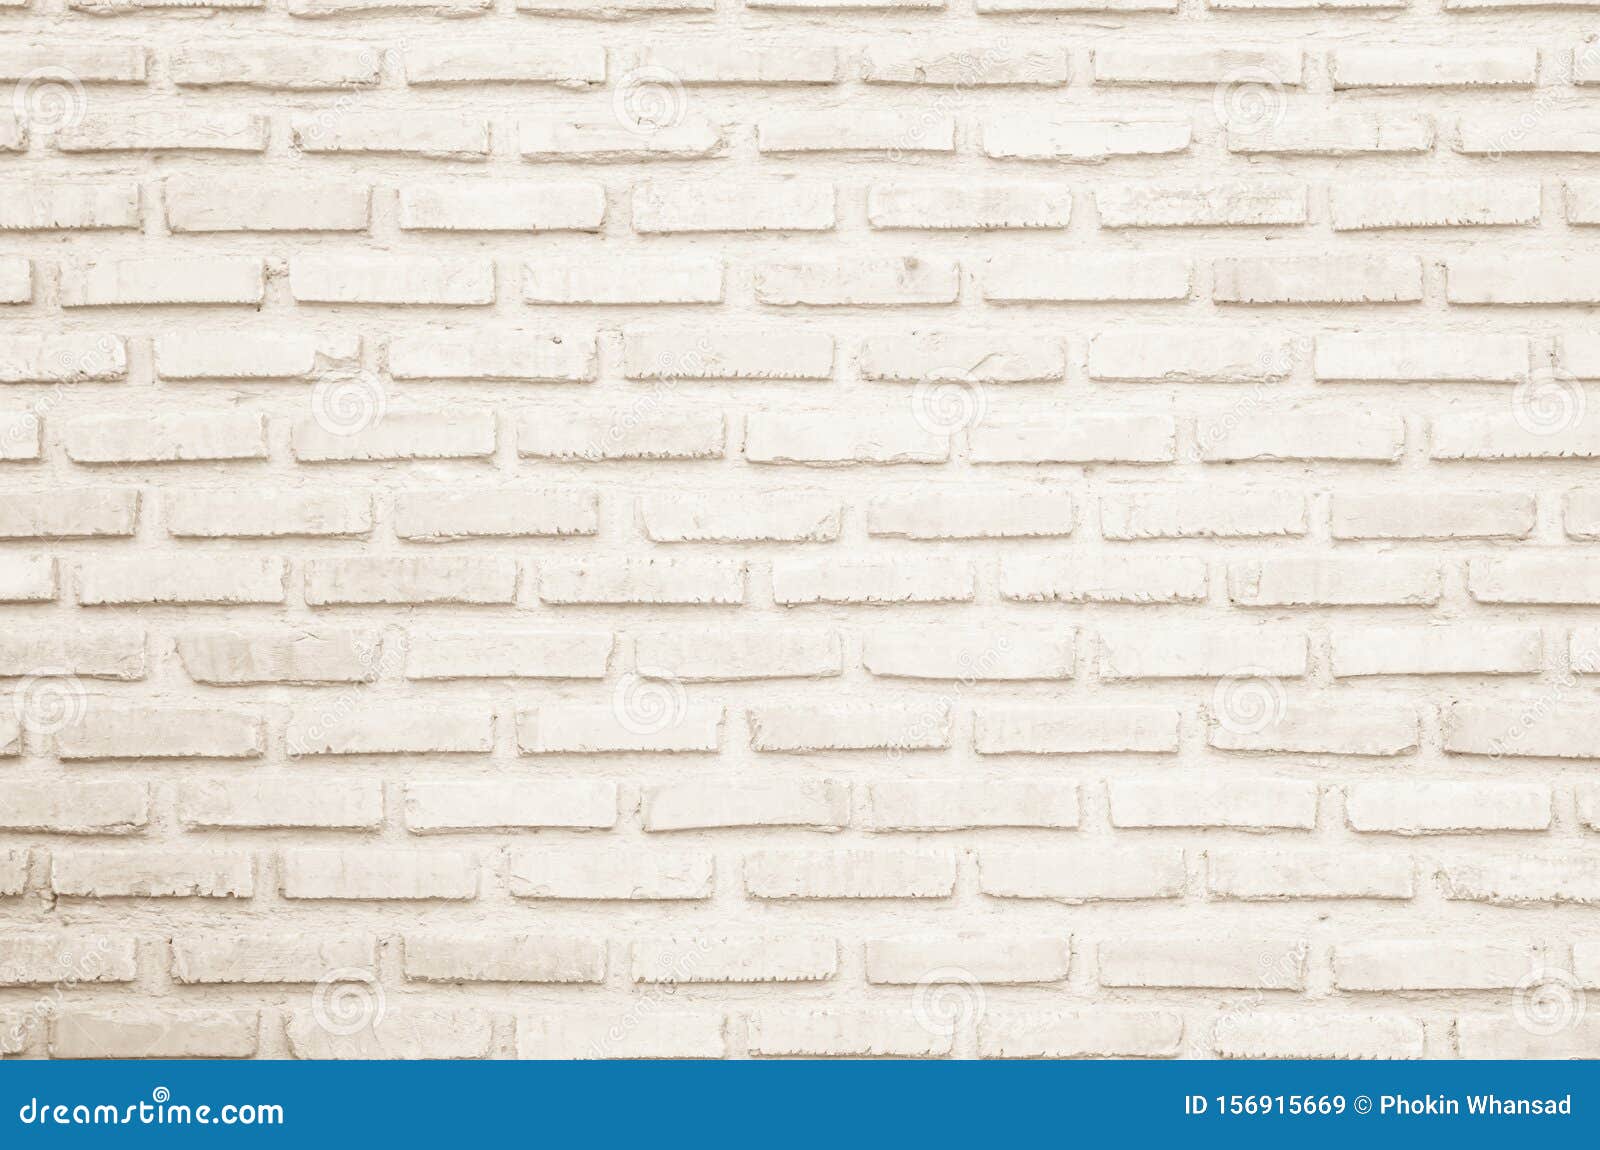 Wall Cream Brick Wall Texture Background In Room At Subway